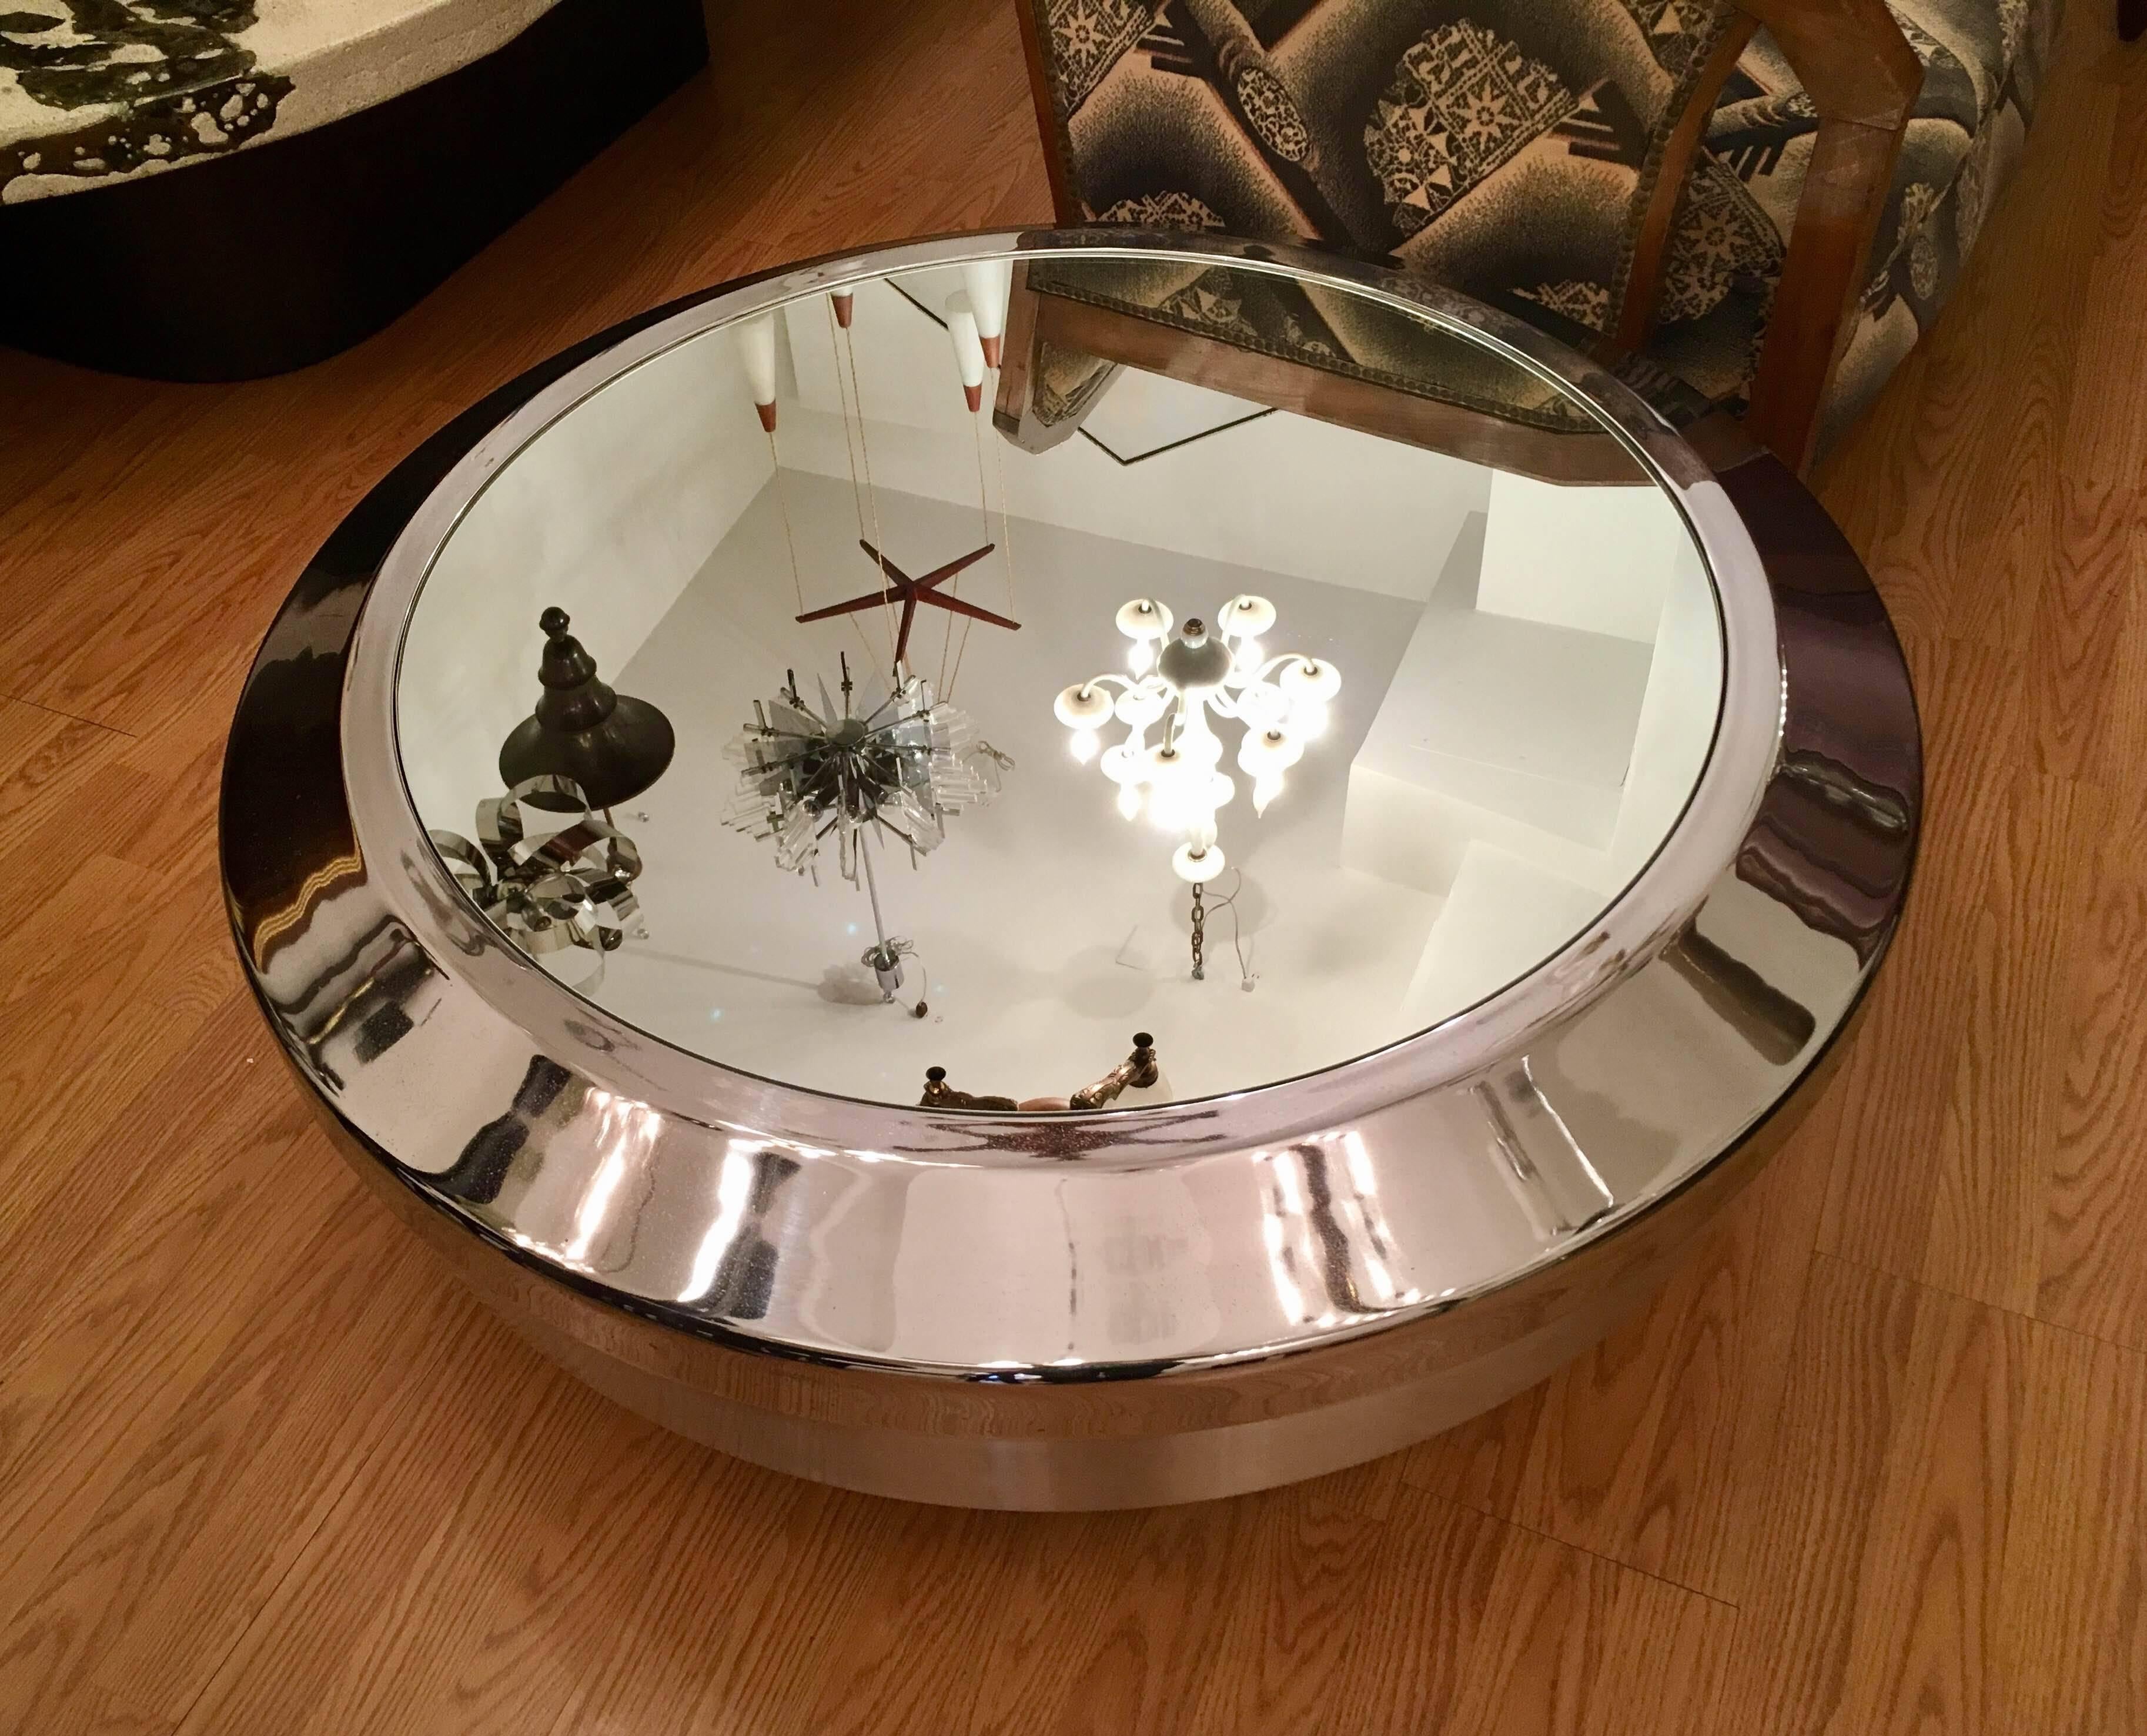 A rare pair of Space Age design coffee tables by Venice, California-based architect, Gary John Neville. The cocktail tables are composed of a brushed spun metal base and a polished chrome and a mirror top.